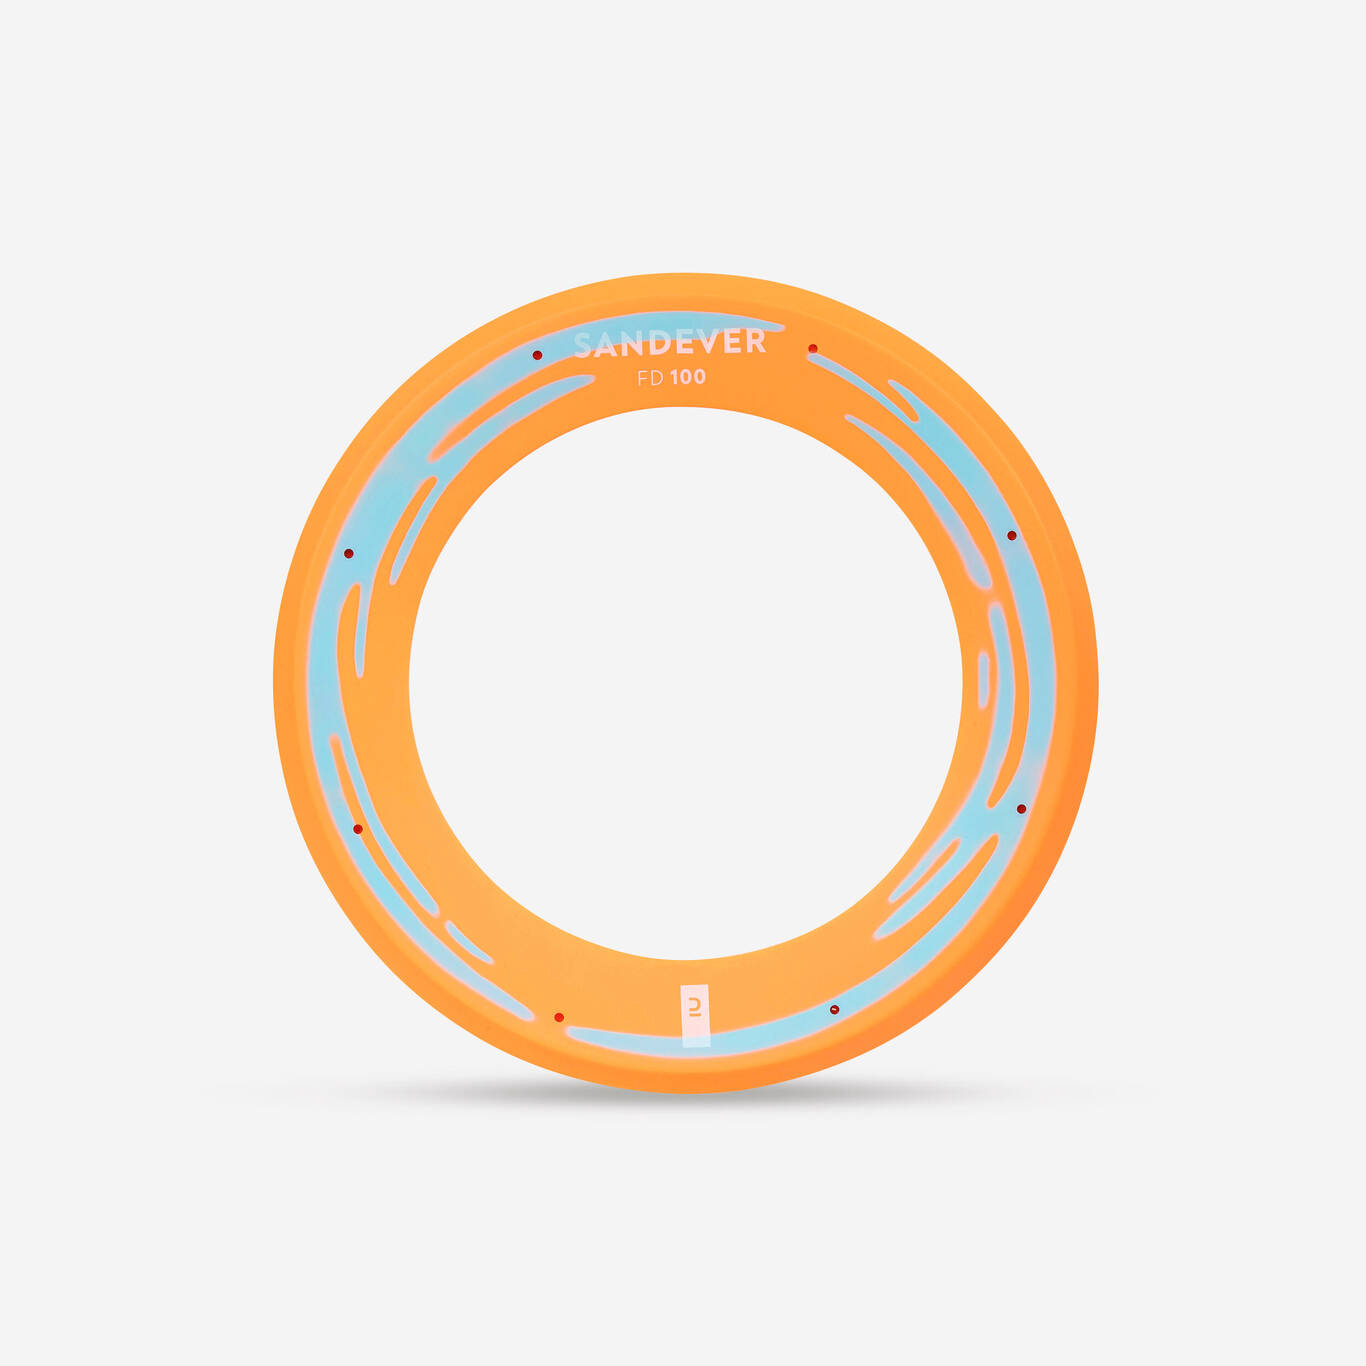 A soft orange disc for long-distance throws.